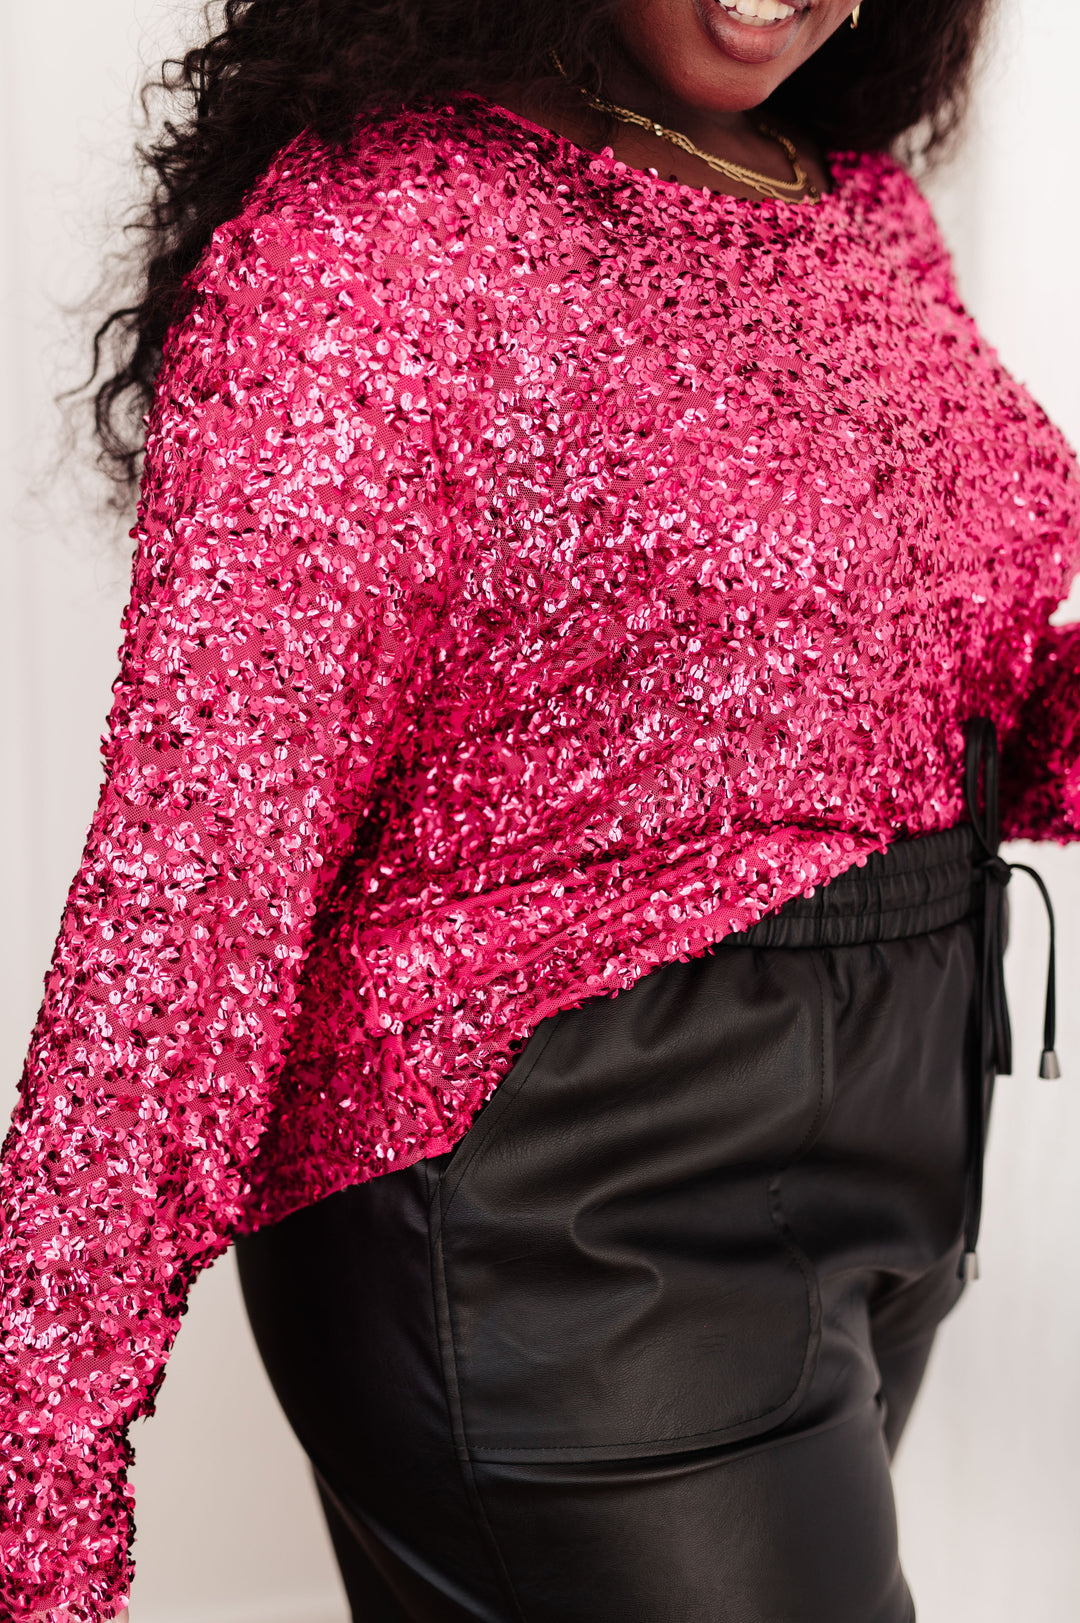 You Found Me Sequin Top in Fuchsia - OW *FINAL SALE*